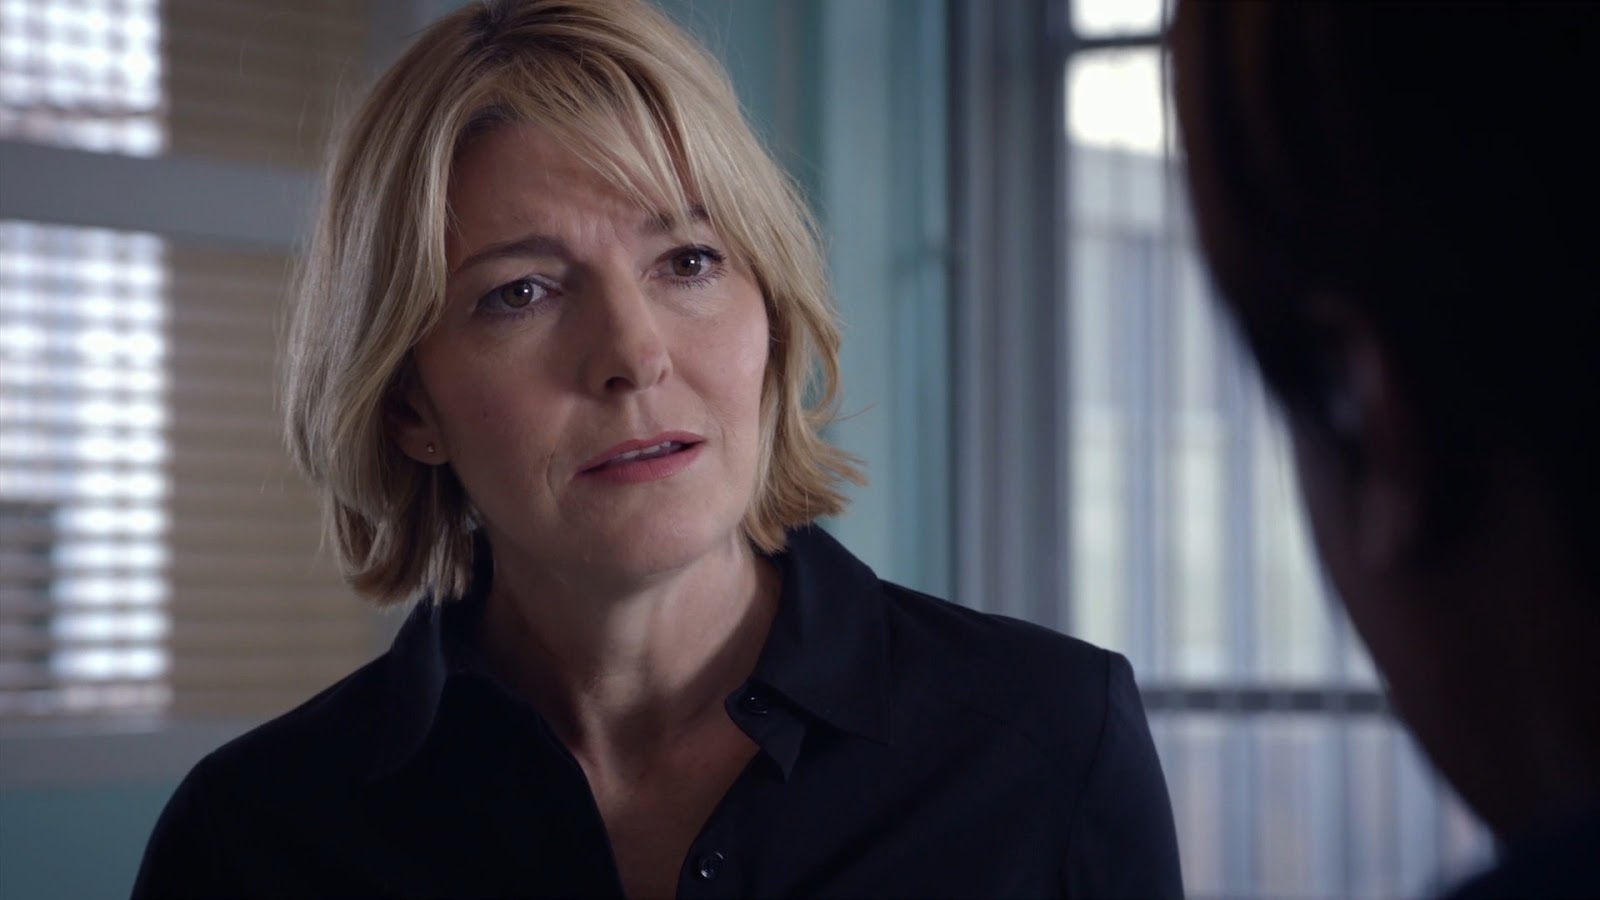 Screencaps - Jemma Redgrave - "Holby City - All Fall Down" .